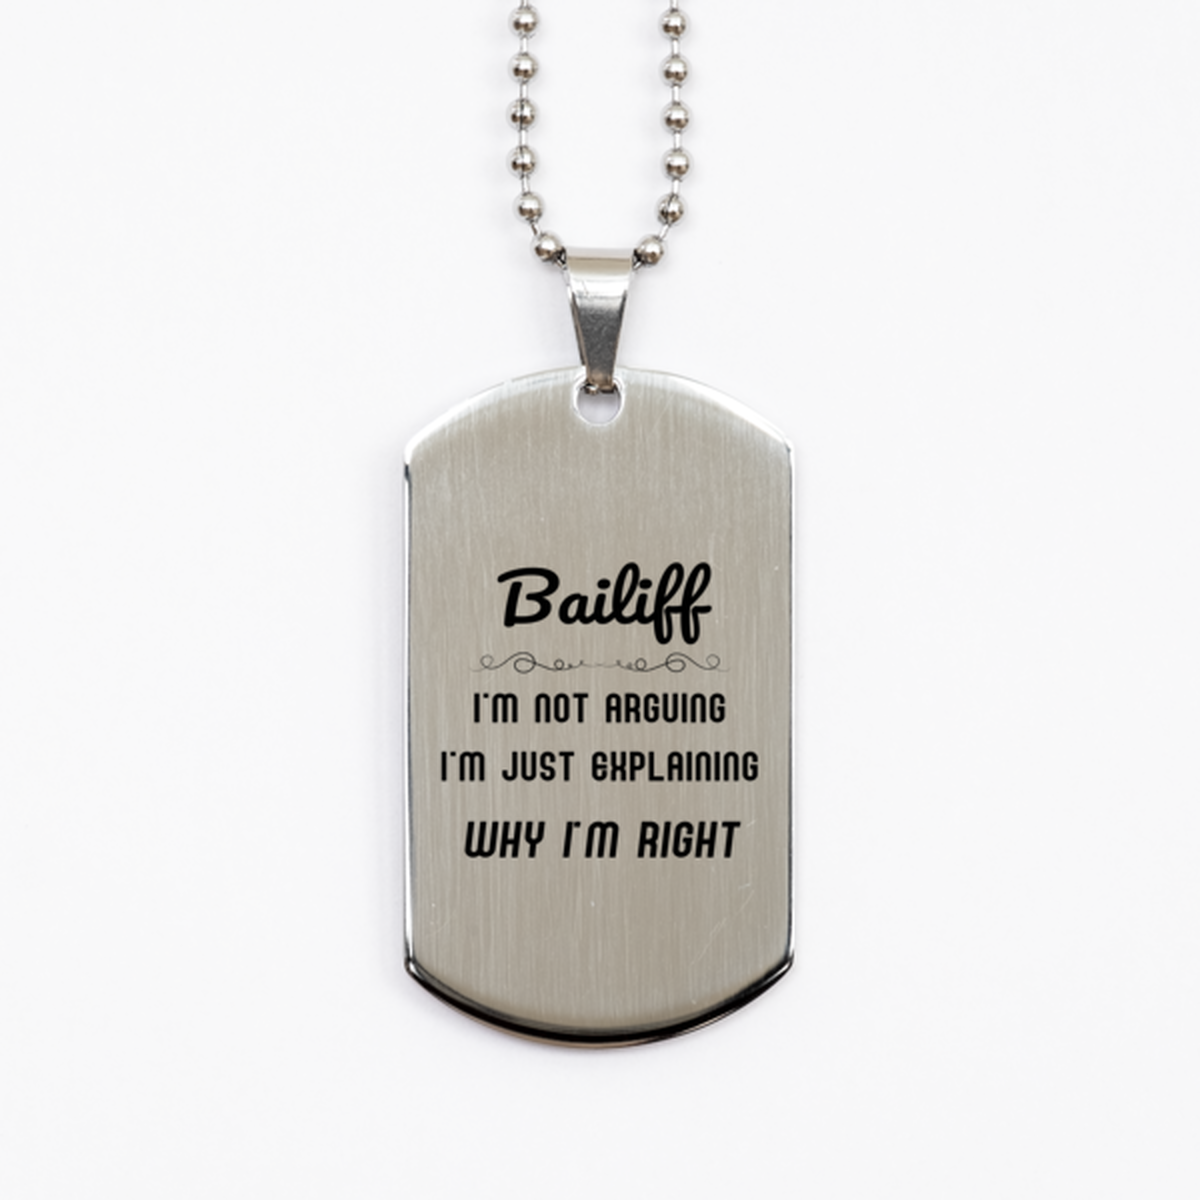 Bailiff I'm not Arguing. I'm Just Explaining Why I'm RIGHT Silver Dog Tag, Funny Saying Quote Bailiff Gifts For Bailiff Graduation Birthday Christmas Gifts for Men Women Coworker